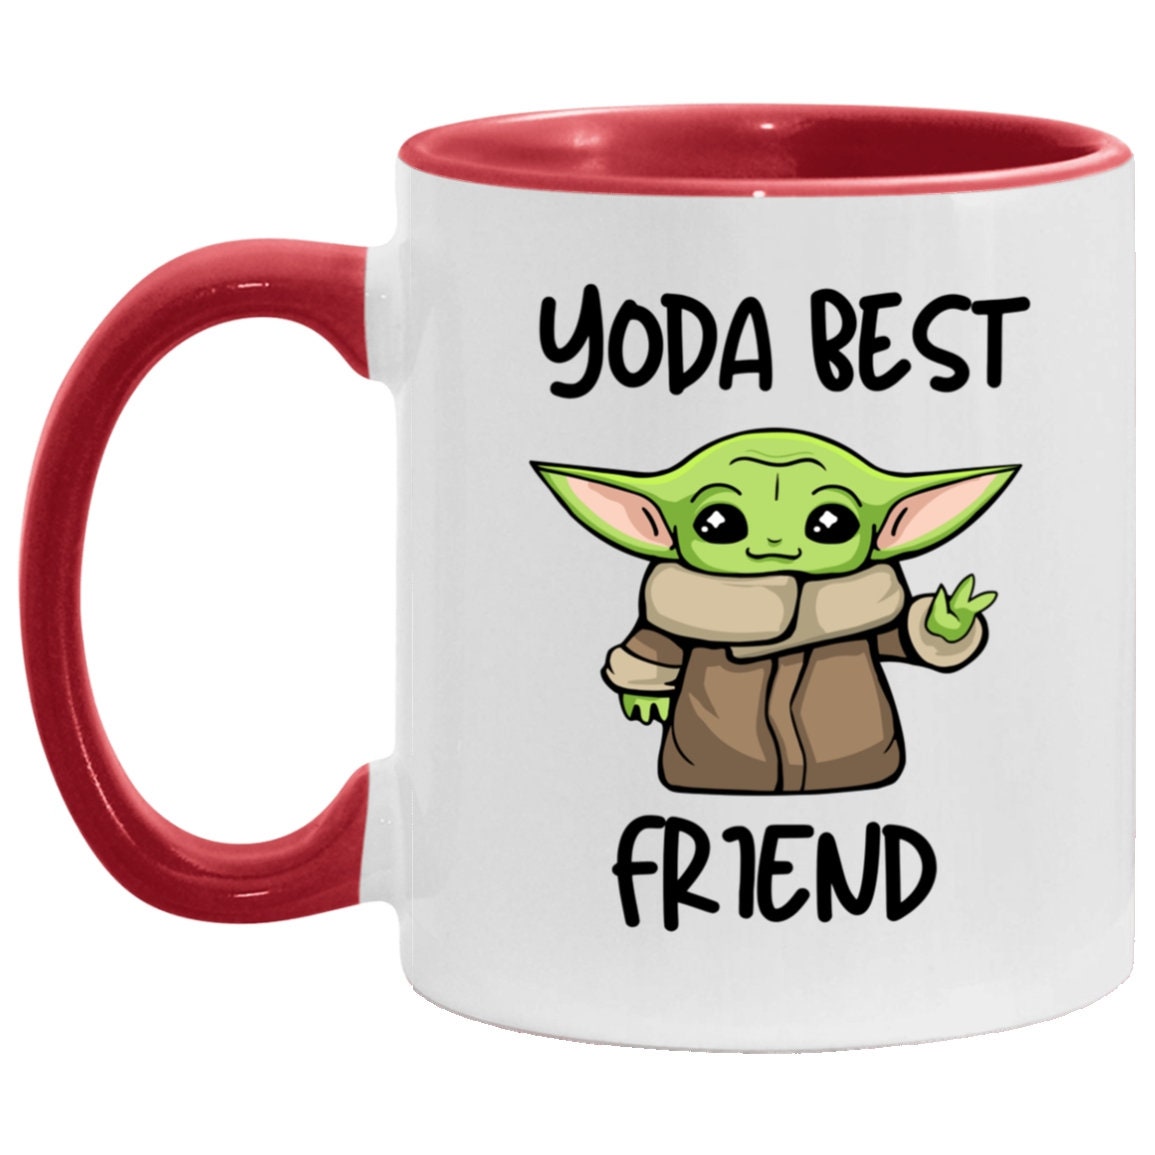 Yoda Best Mom - Funny Cute Coffee Mug Gift For Mother's Day Love